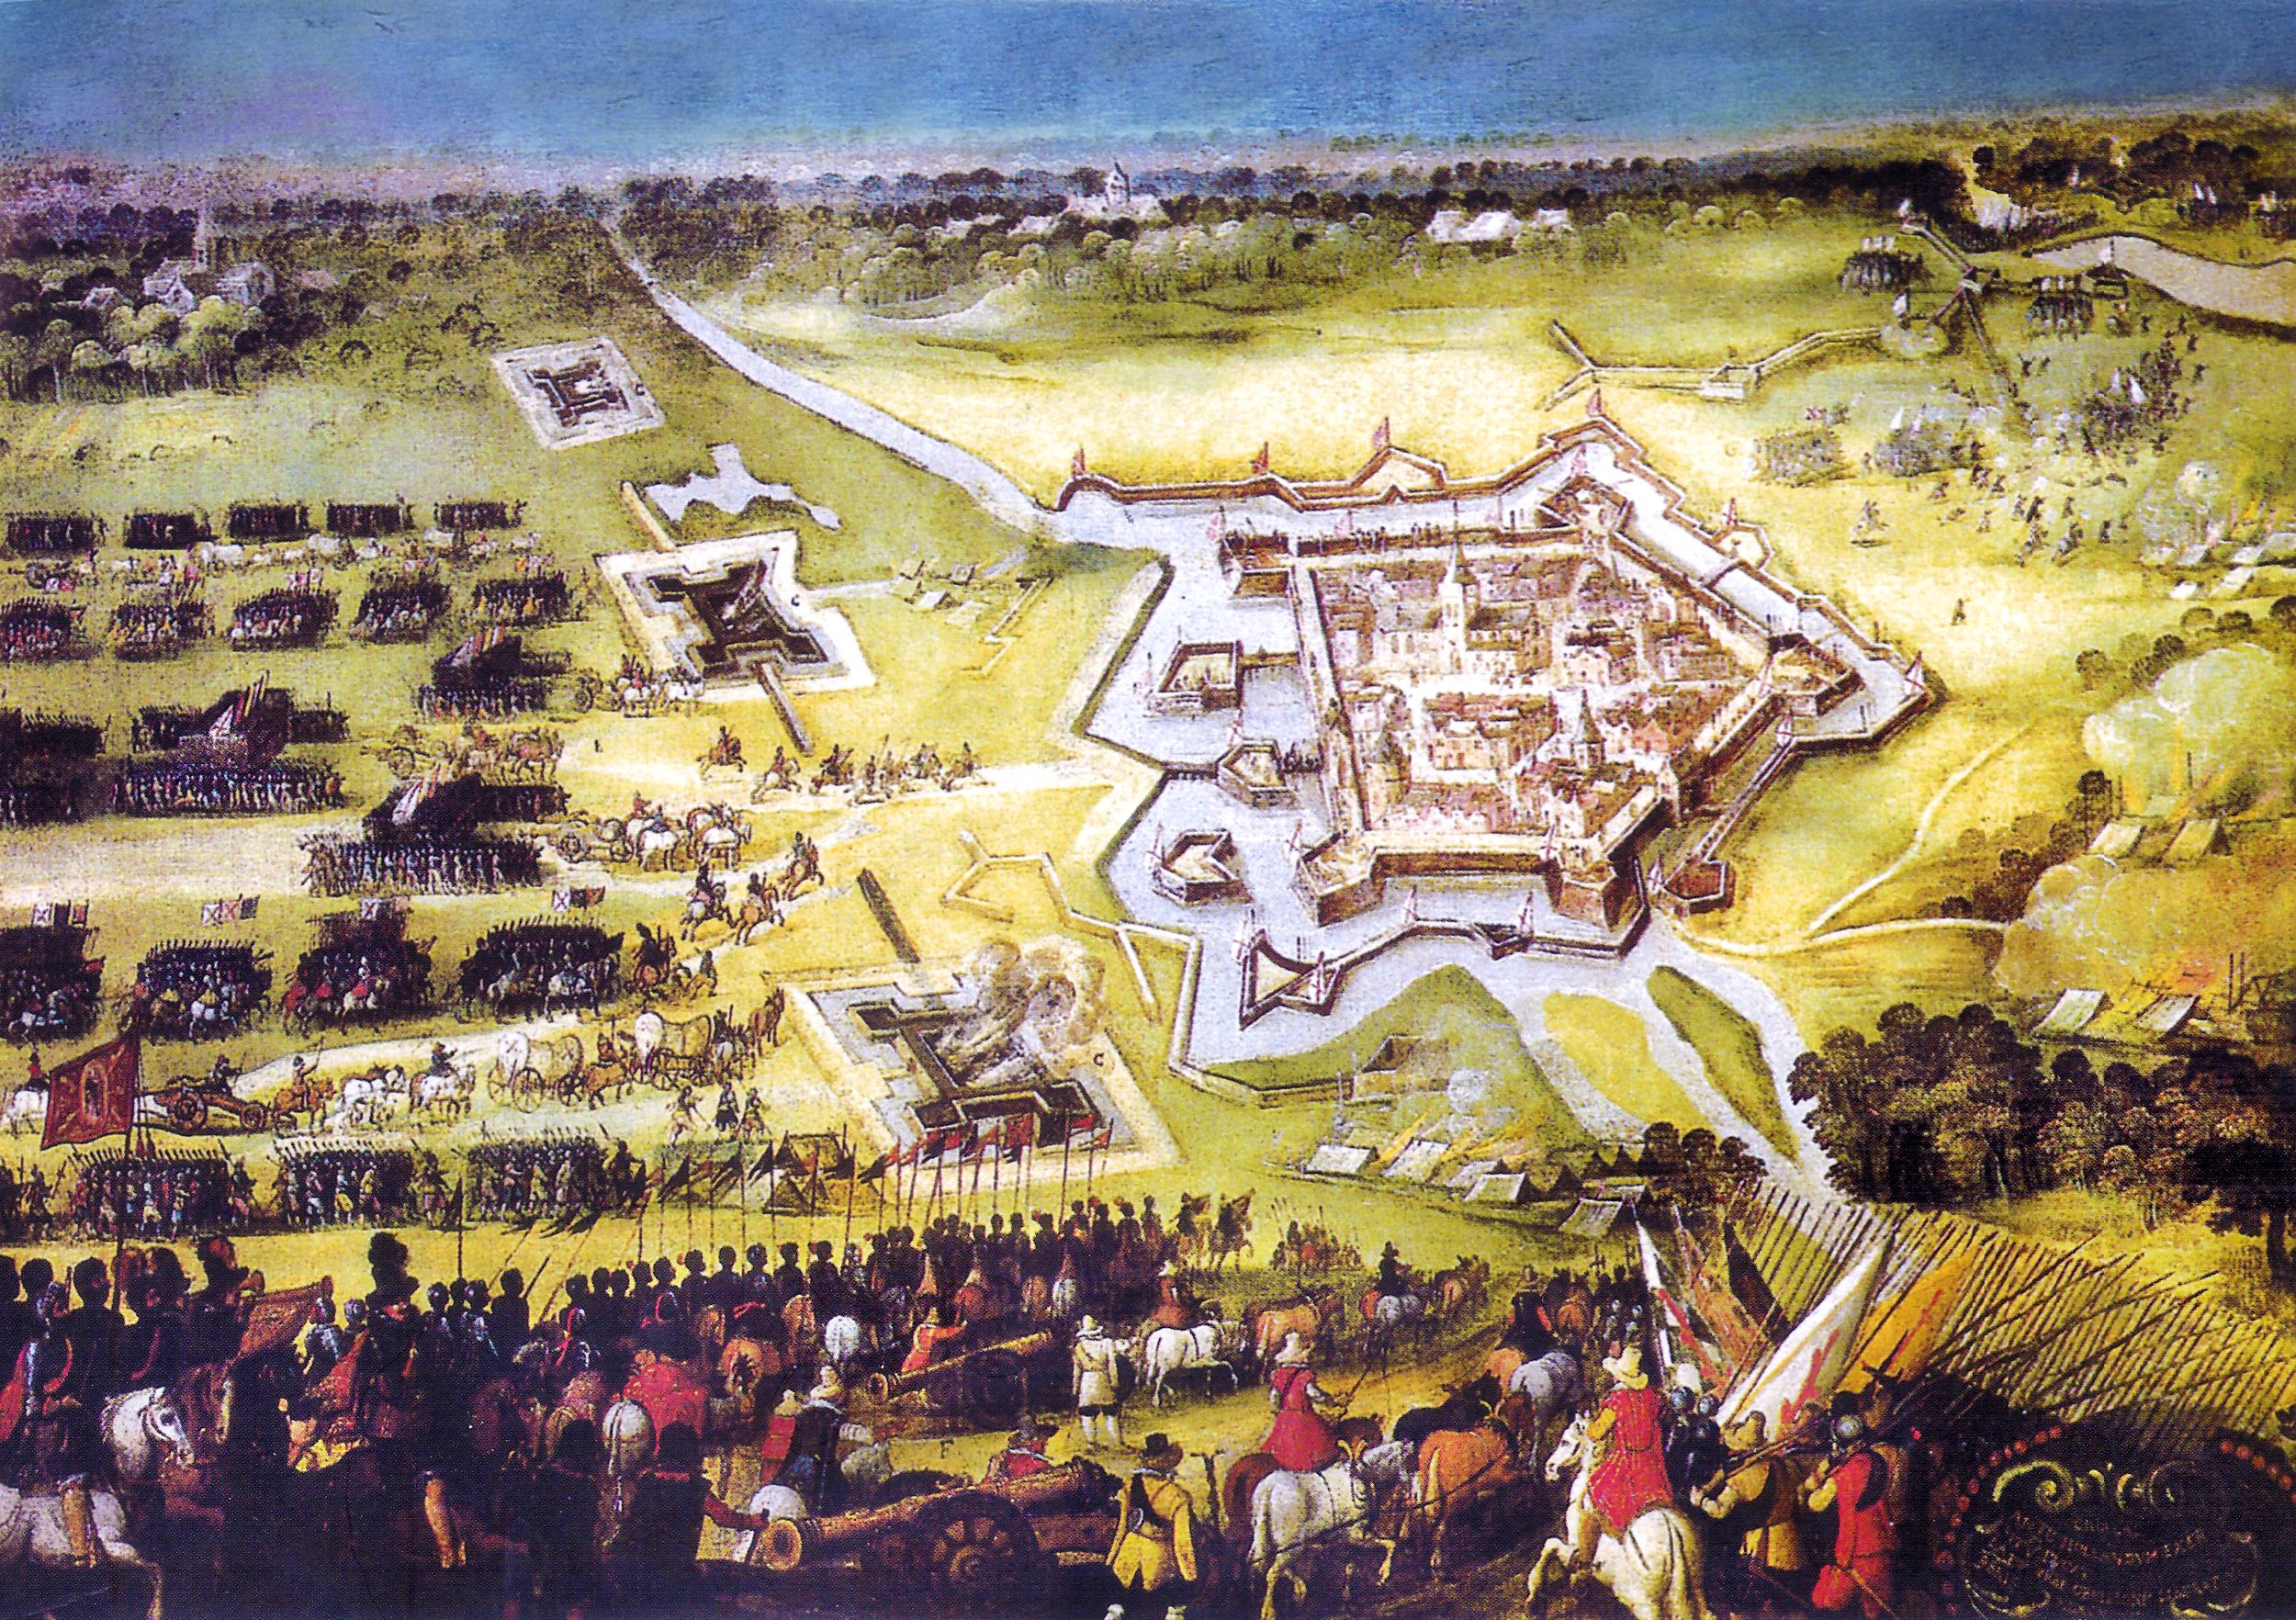 Although Spinola captured Groenlo in Gelderland in 1606, he was unable to penetrate Dutch Stadtholder Maurice of Nassau’s strong defenses protecting the heart of the United Provinces.